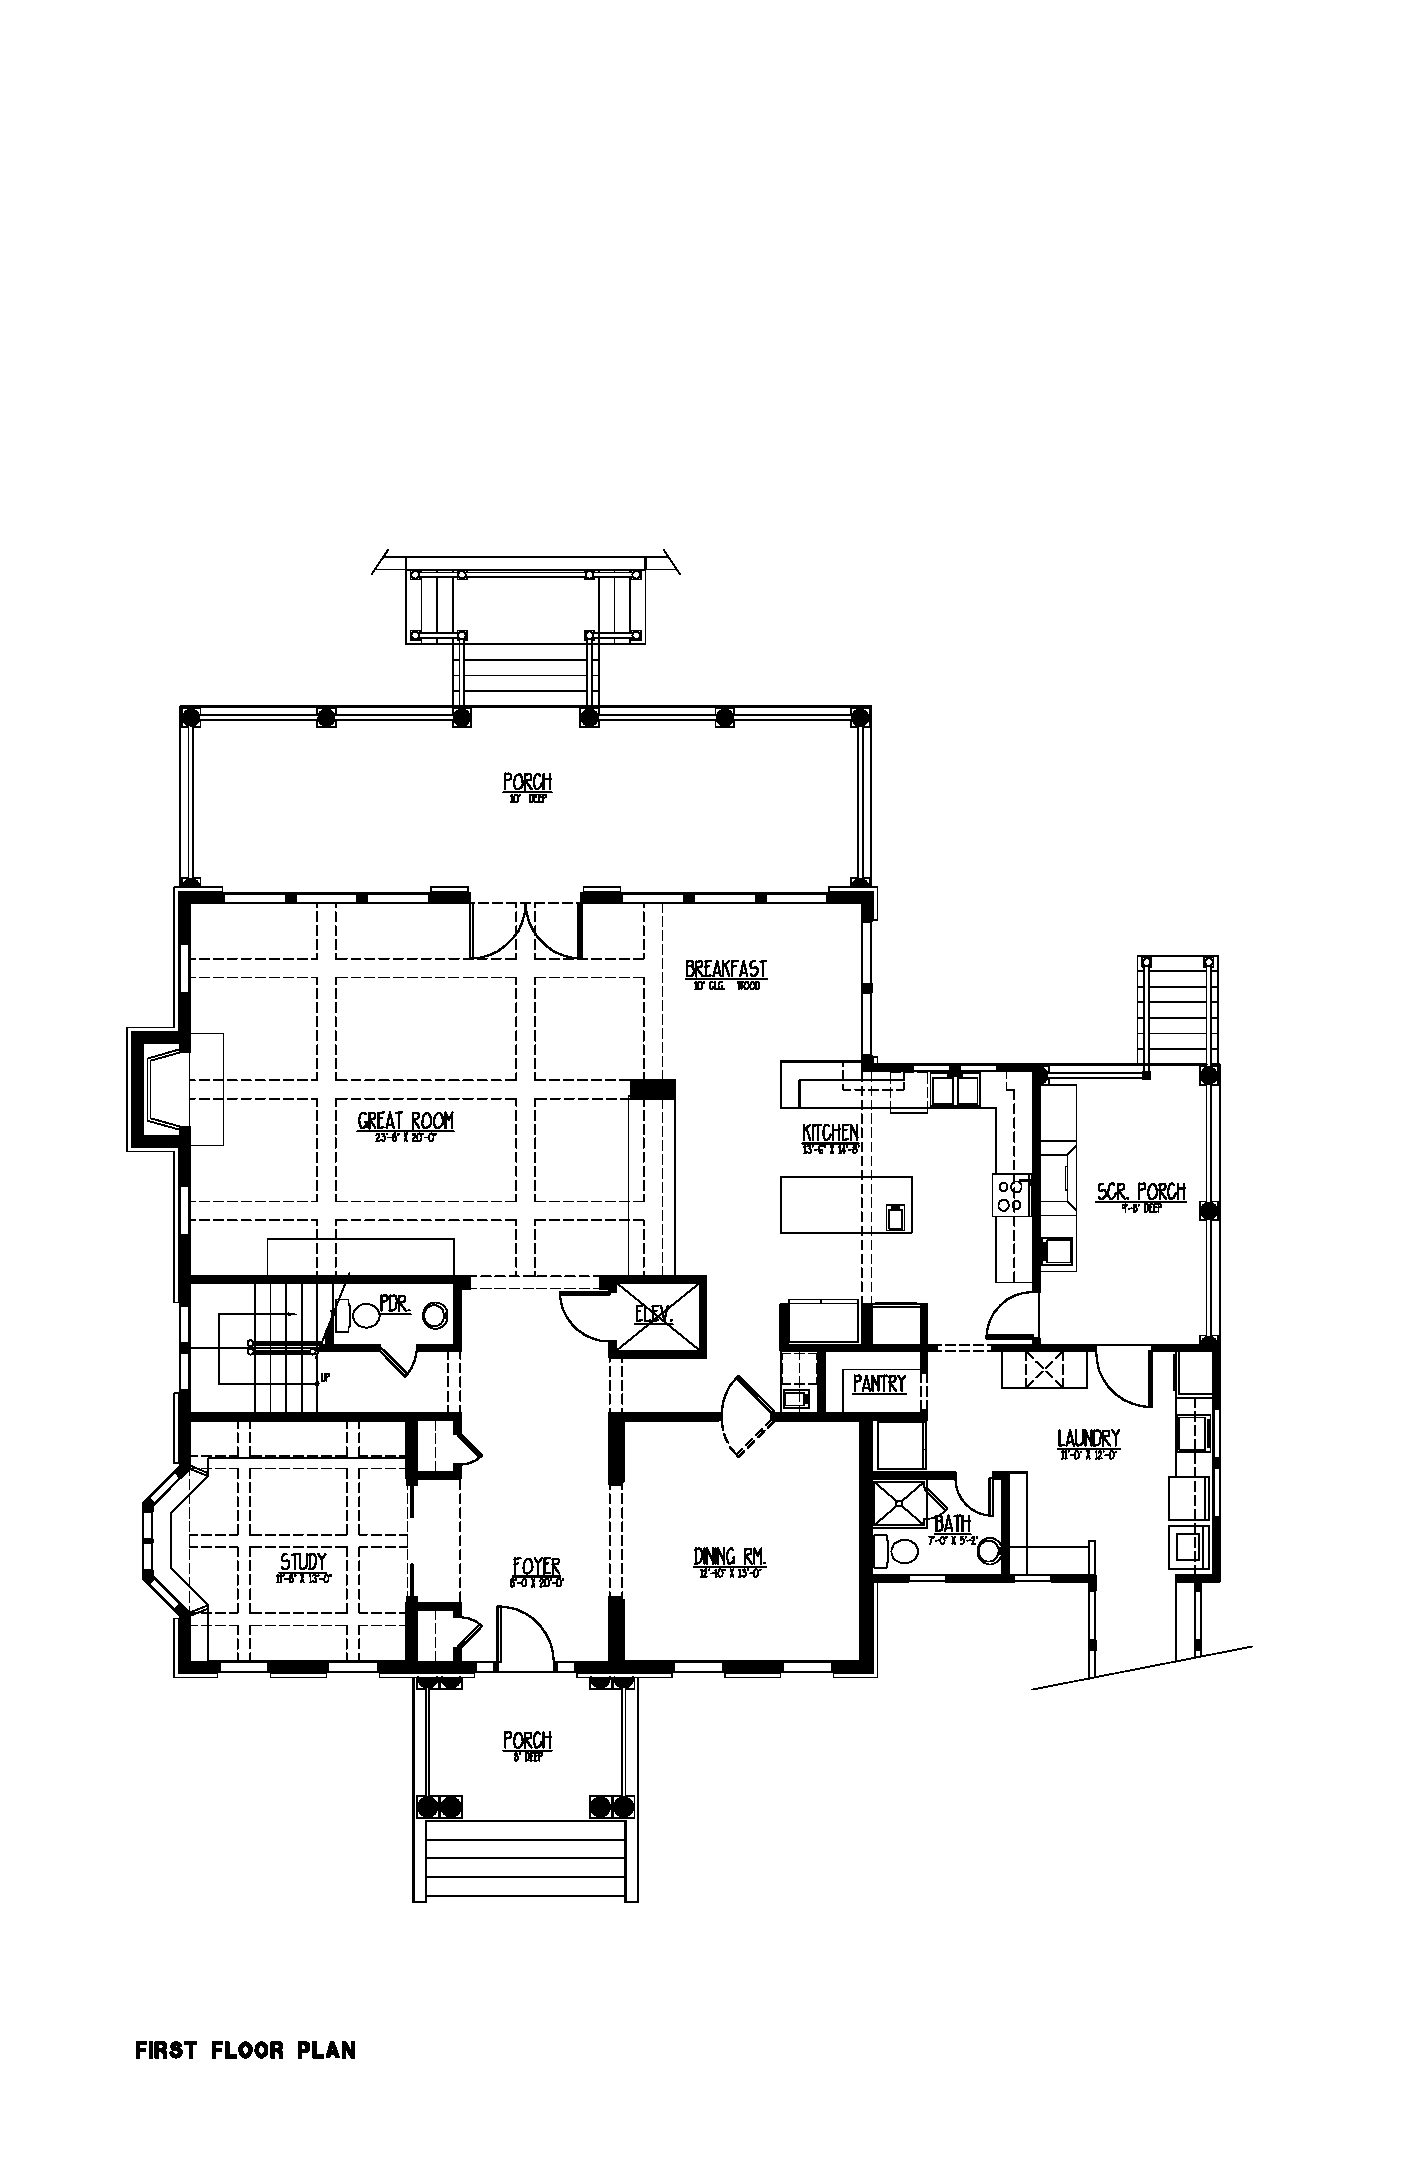 Three Story House Plans 5 Bedroom